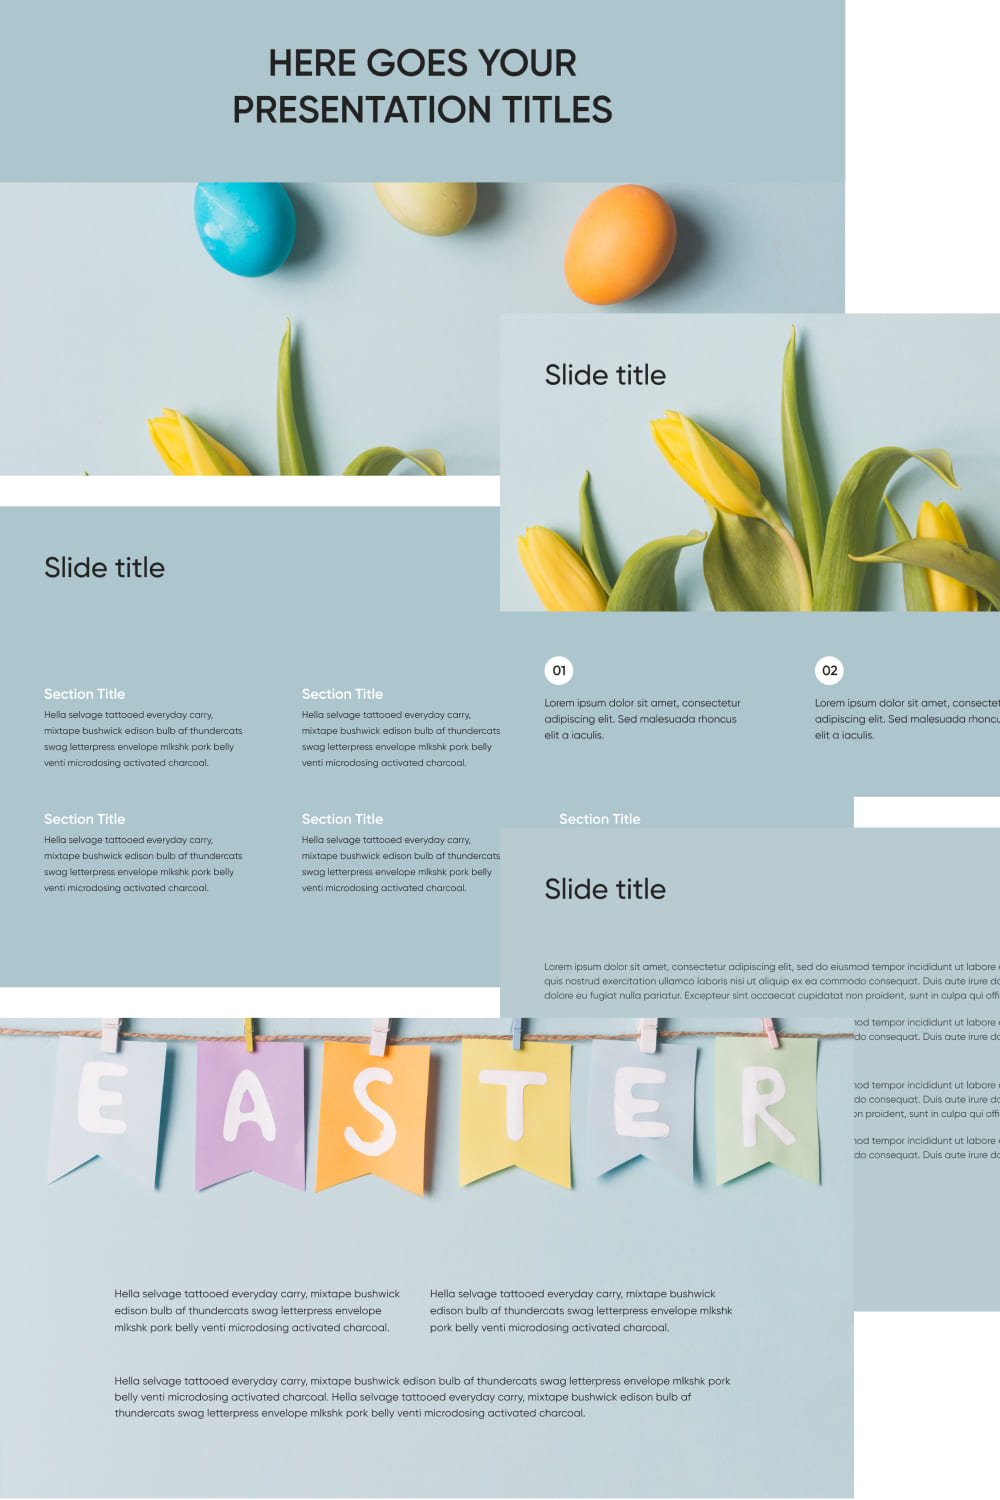 Pinterest Free Easter Powerpoint Template.